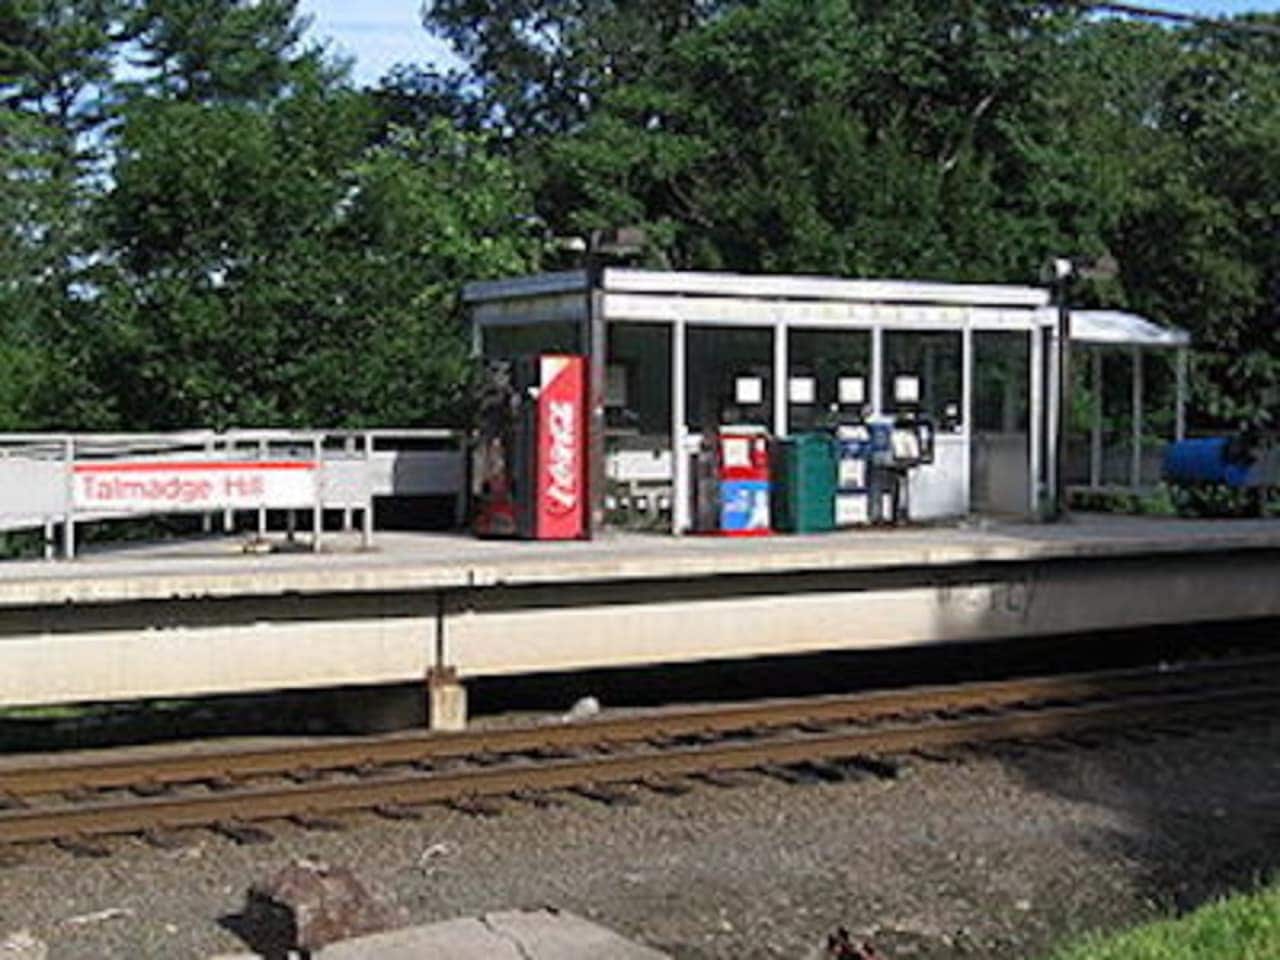 A man was found dead of an apparent self-inflicted gunshot wound early Wednesday evening at the Talmadge Hill train station in New Canaan.